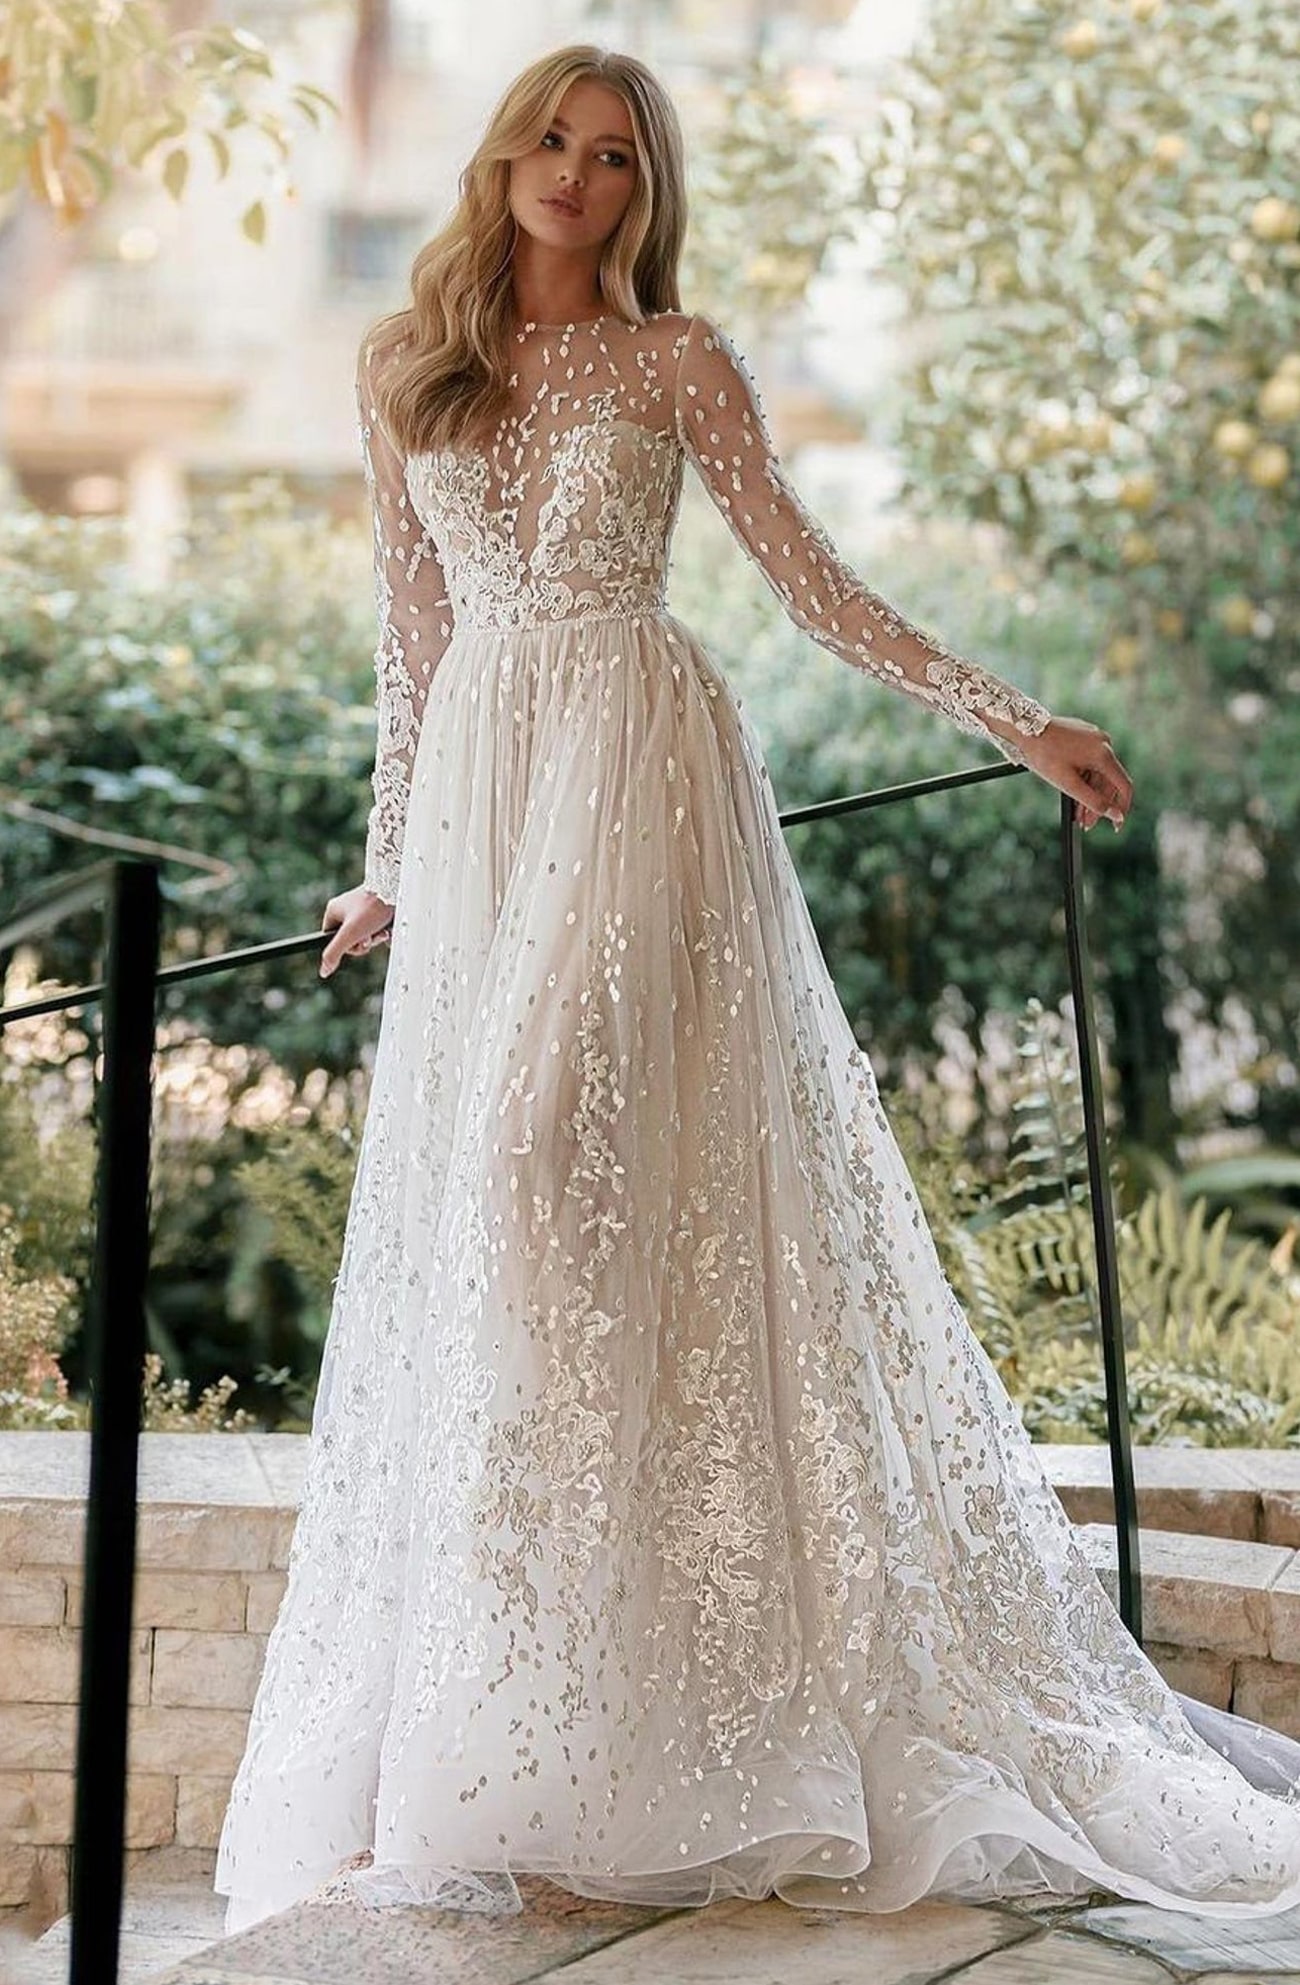 20 Chic & Sheer Wedding Dresses from Etsy | SouthBound Bride